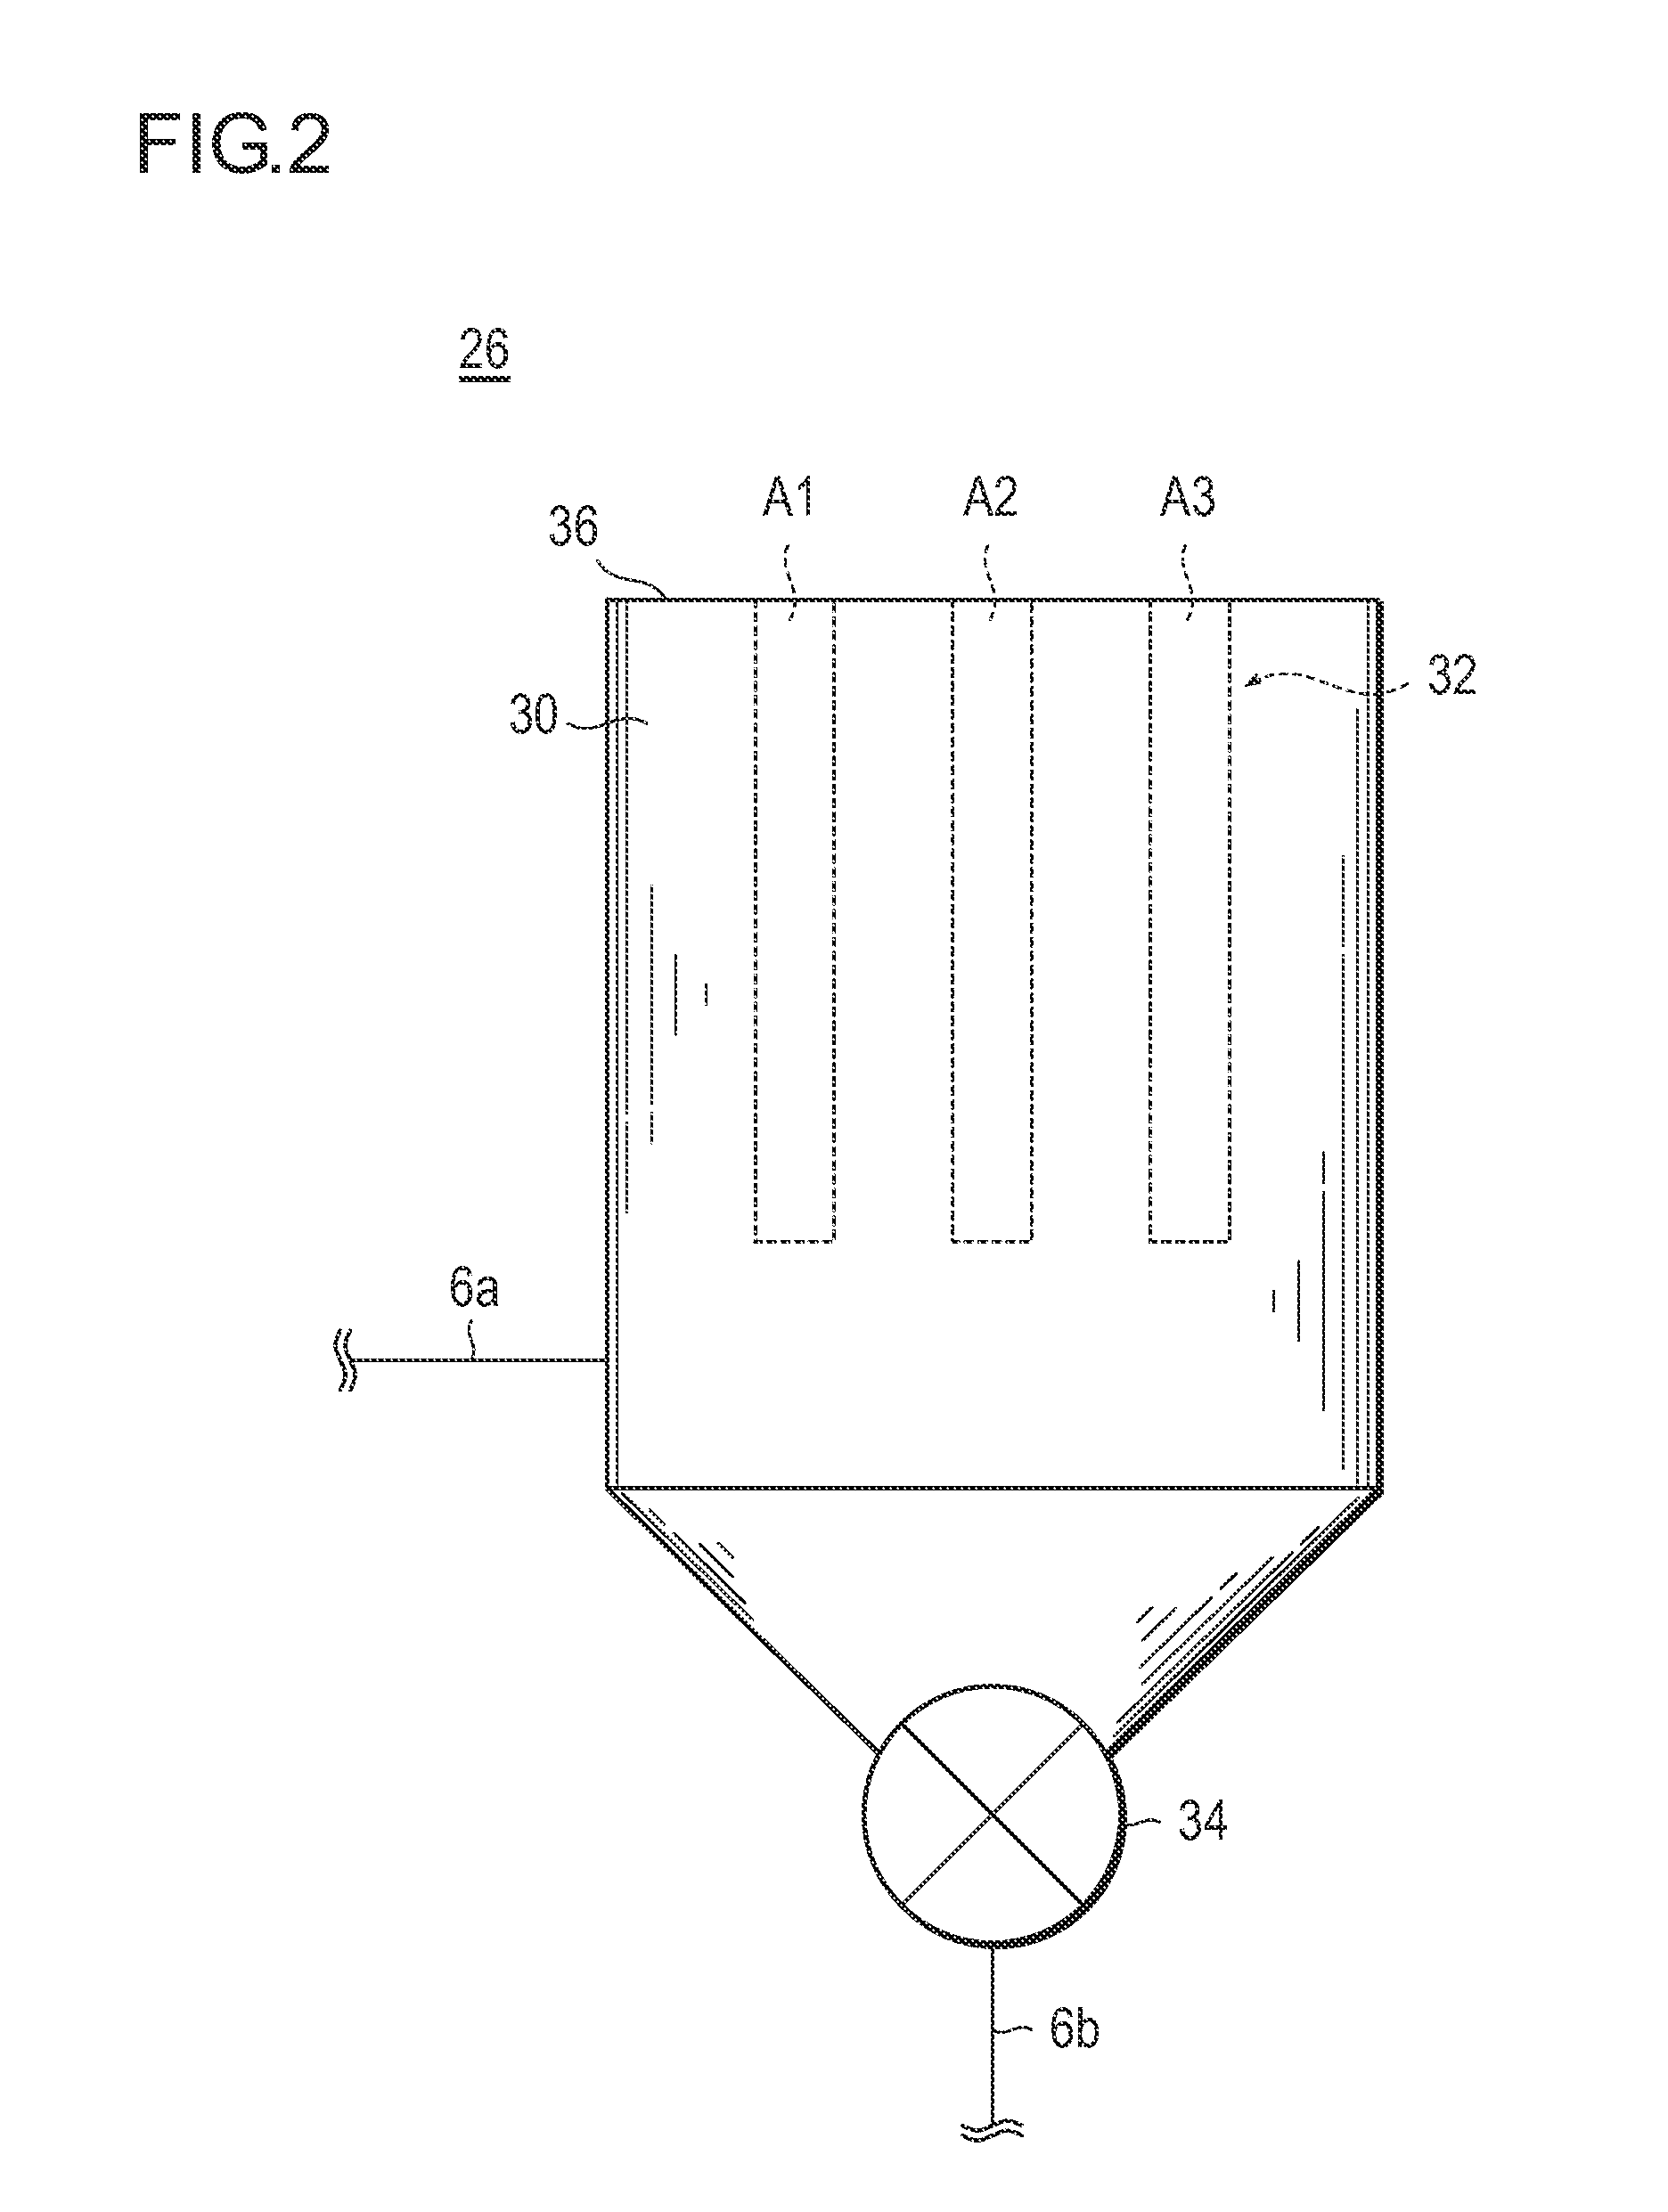 Method of manufacturing a particulate water-absorbing agent composed principally of a water-absorbing resin